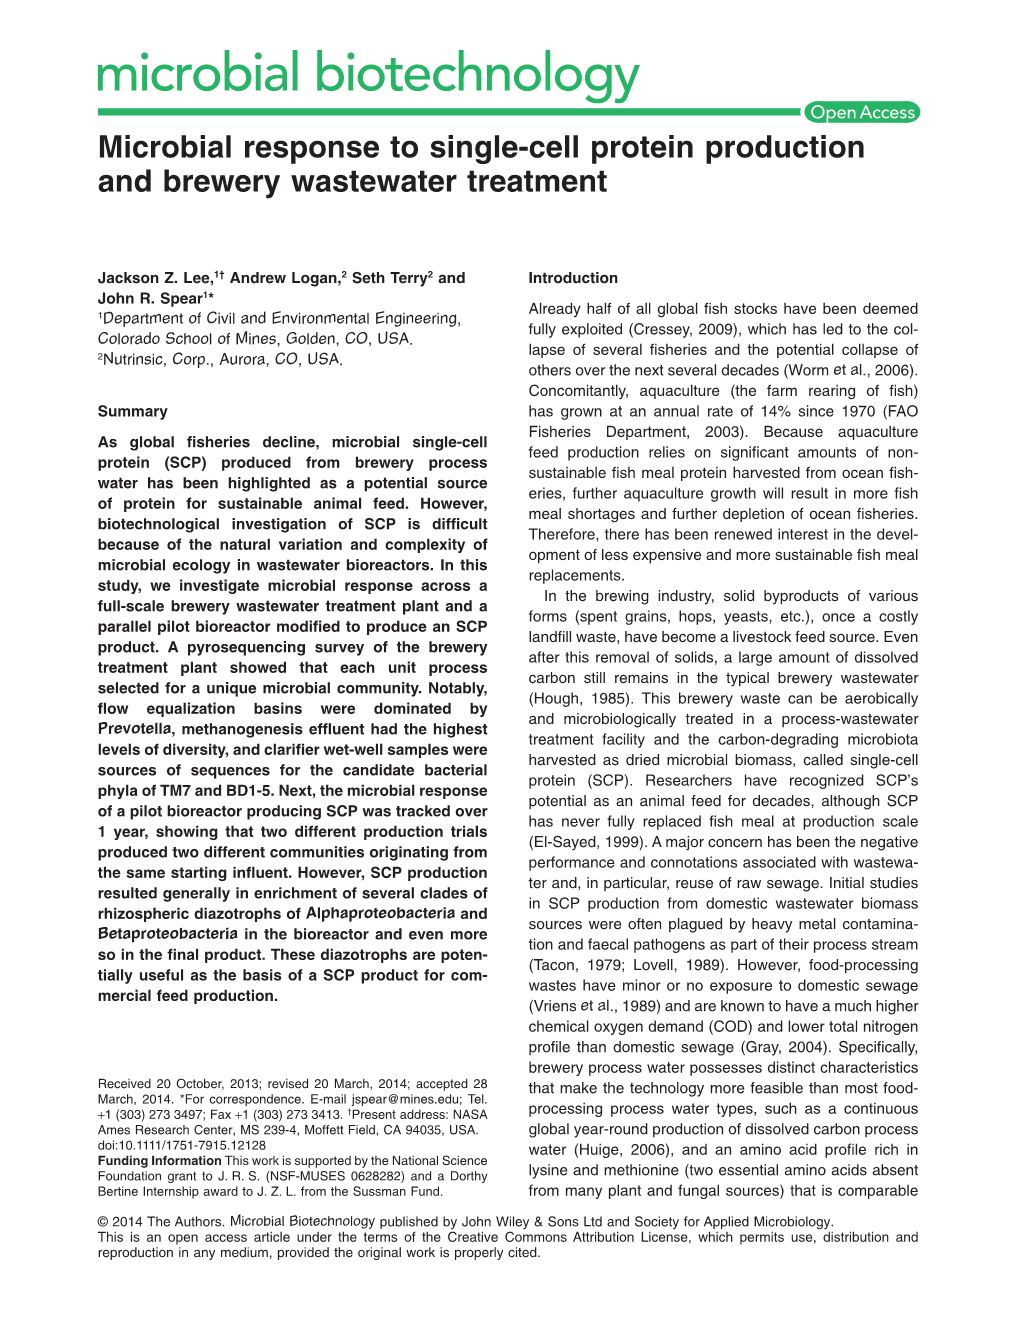 Microbial Response to Singlecell Protein Production and Brewery